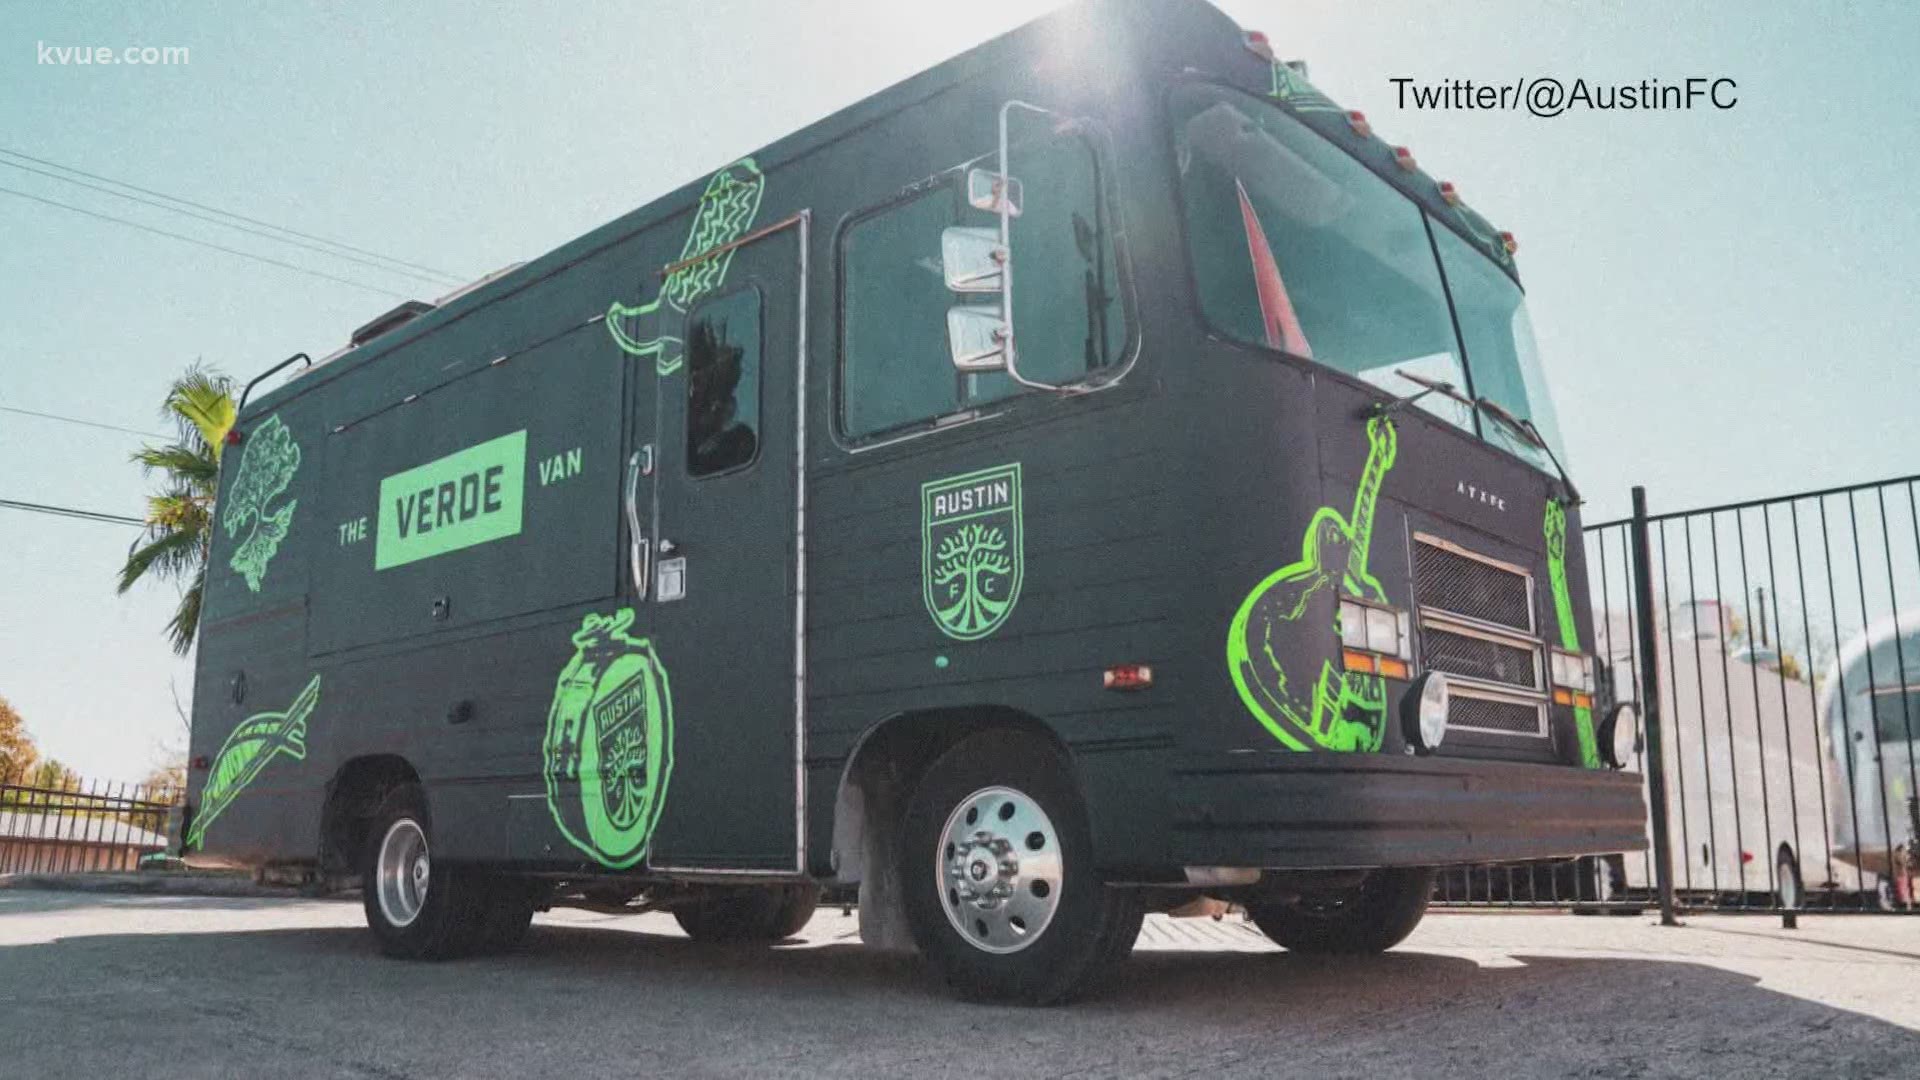 Austin FC will unveil their jerseys on Wednesday and begin selling them out of "Verde Vans" spread across town.